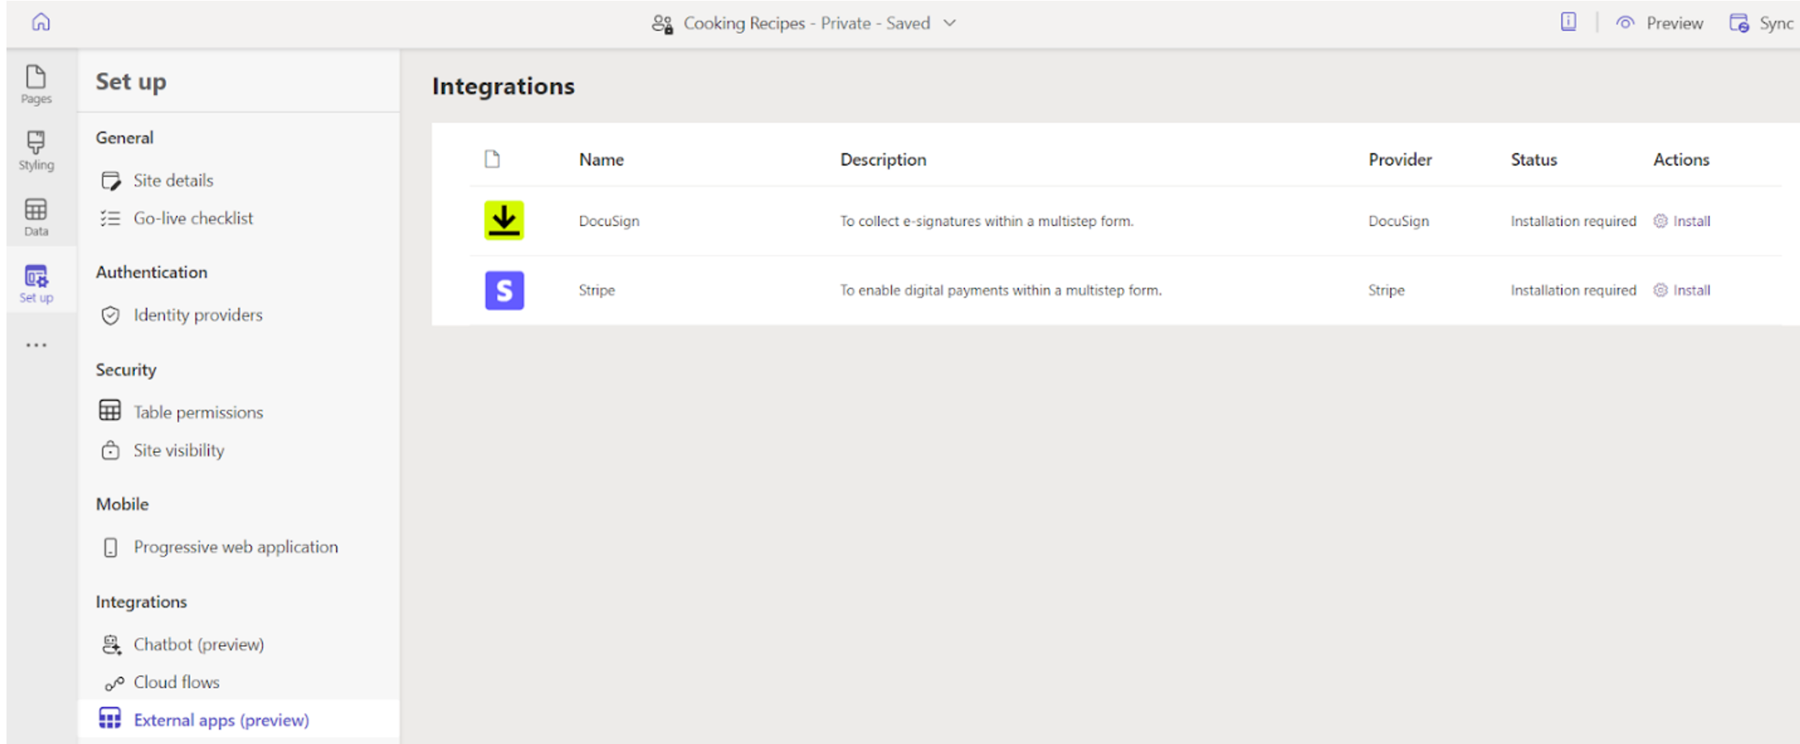 An image showing the Integrations page with options to install DocuSign and Stripe in Power Pages.